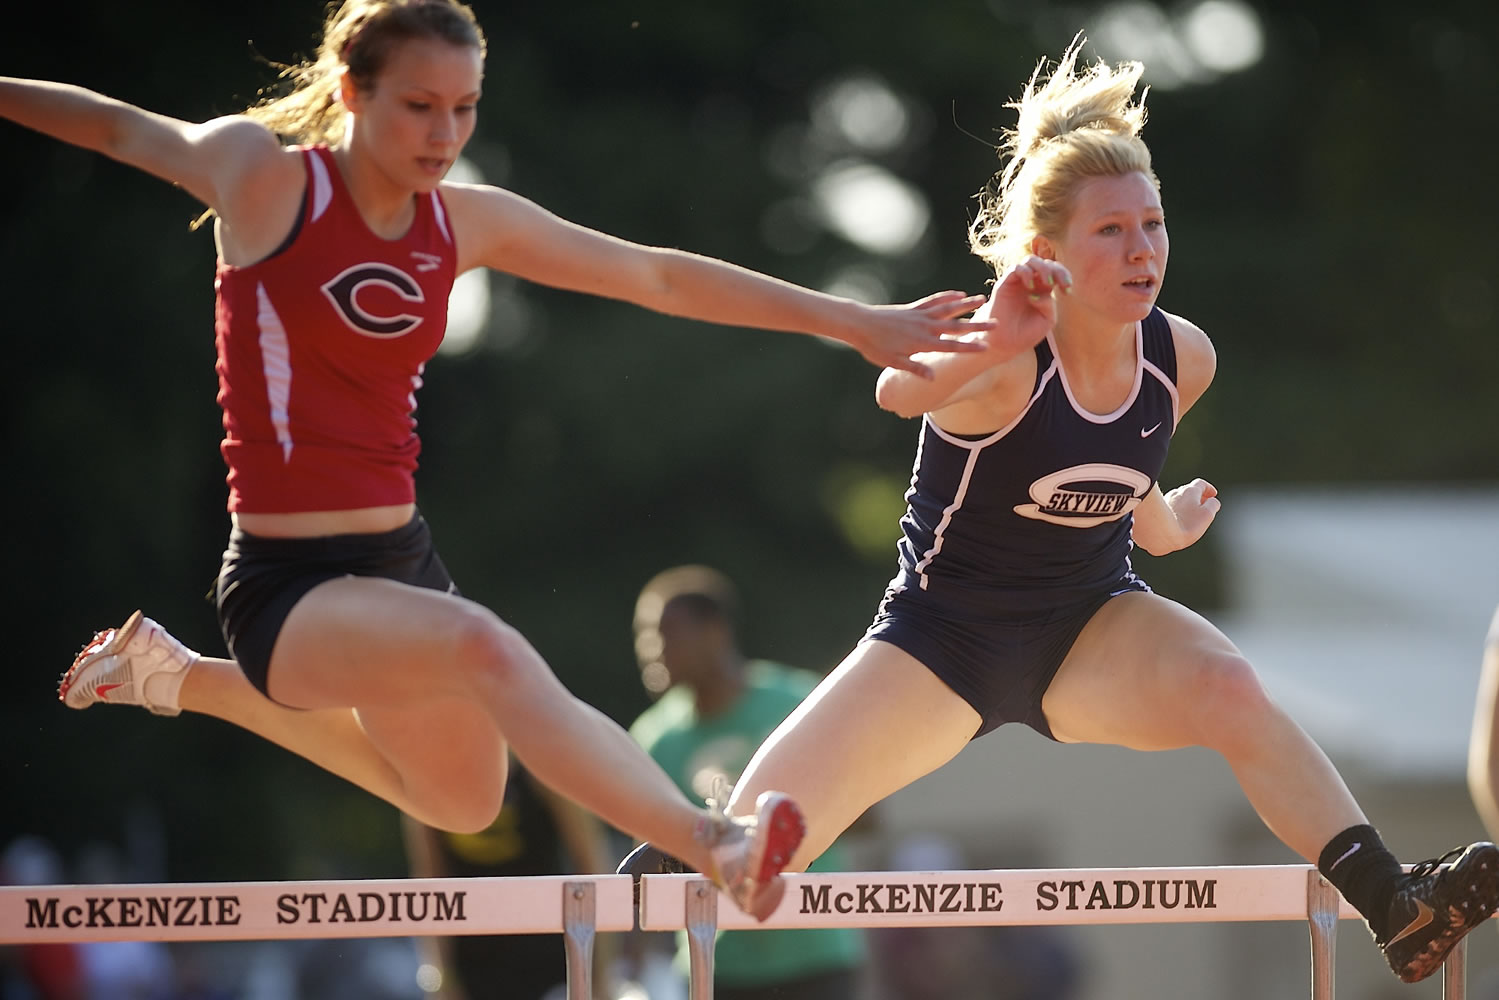 Jordan Davis, left, of Camas High School, and Madison Lanford of Skyview High School, compete in the girl's 300 meter hurdles at the 4A District Track and Field meet Wednesday May 8, 2013 in Vancouver, Washington at McKenzie Stadium. Lanford won with a time of 45.73.